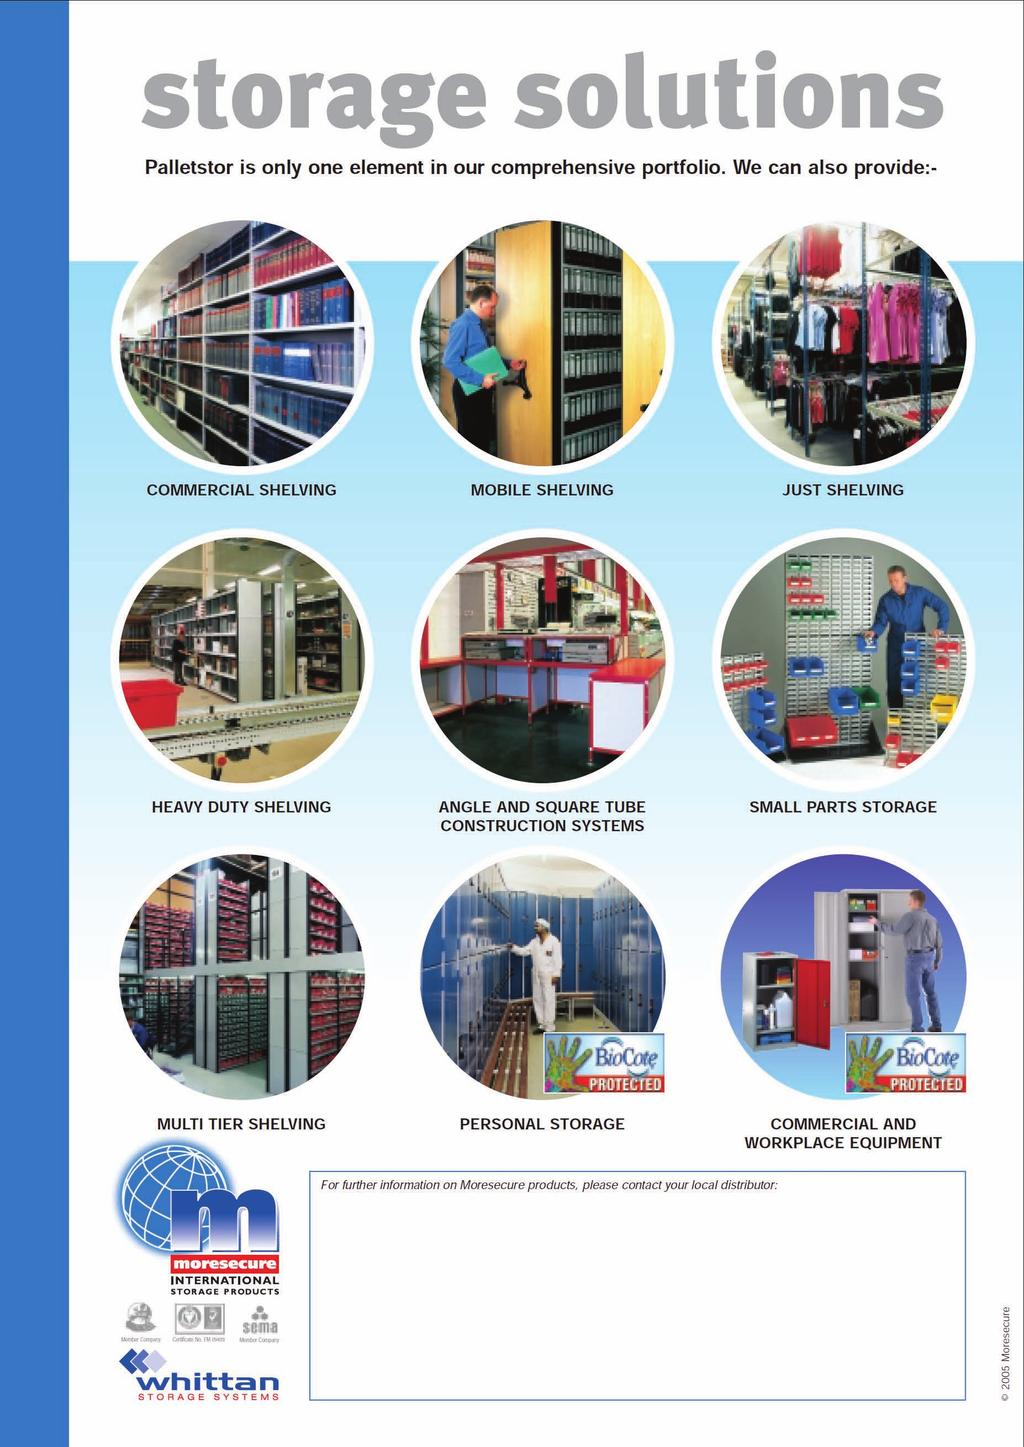 The products shown in this brochure are just one part of the comprehensive Storage Systems (Glos) Ltd